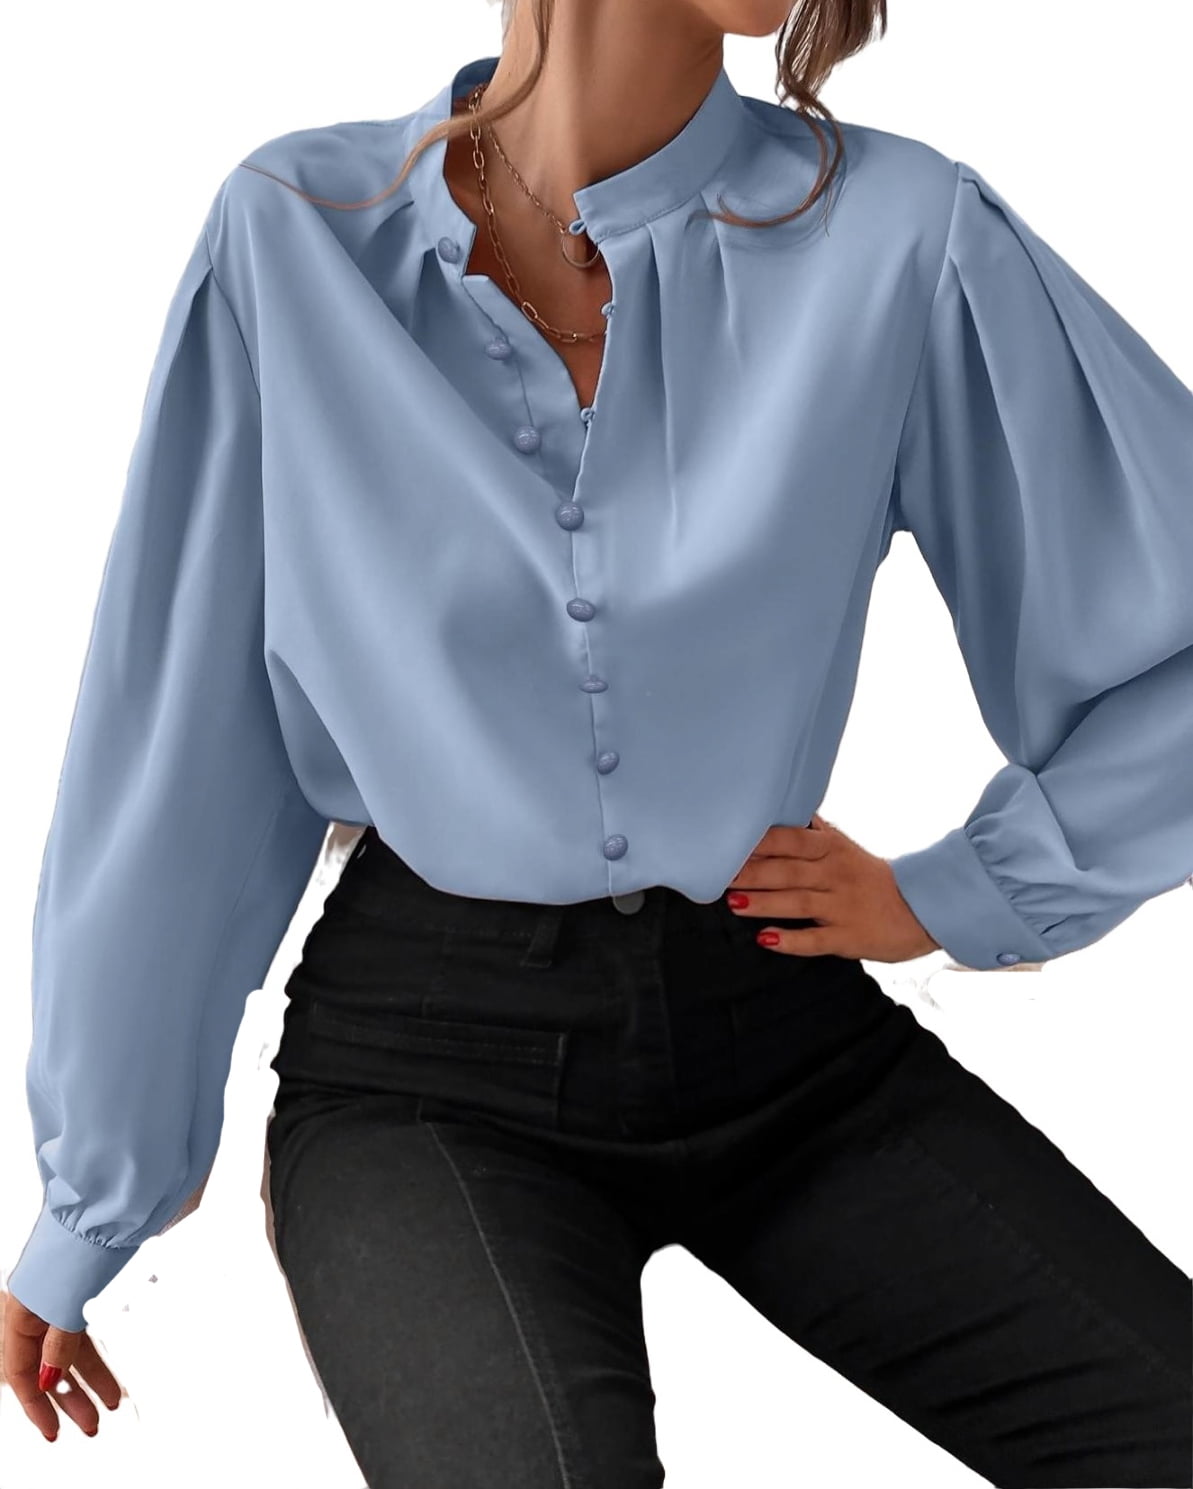 Women's Blouses Elegant Plain Top Stand Collar Fake Buttons Long Sleeve  White S 